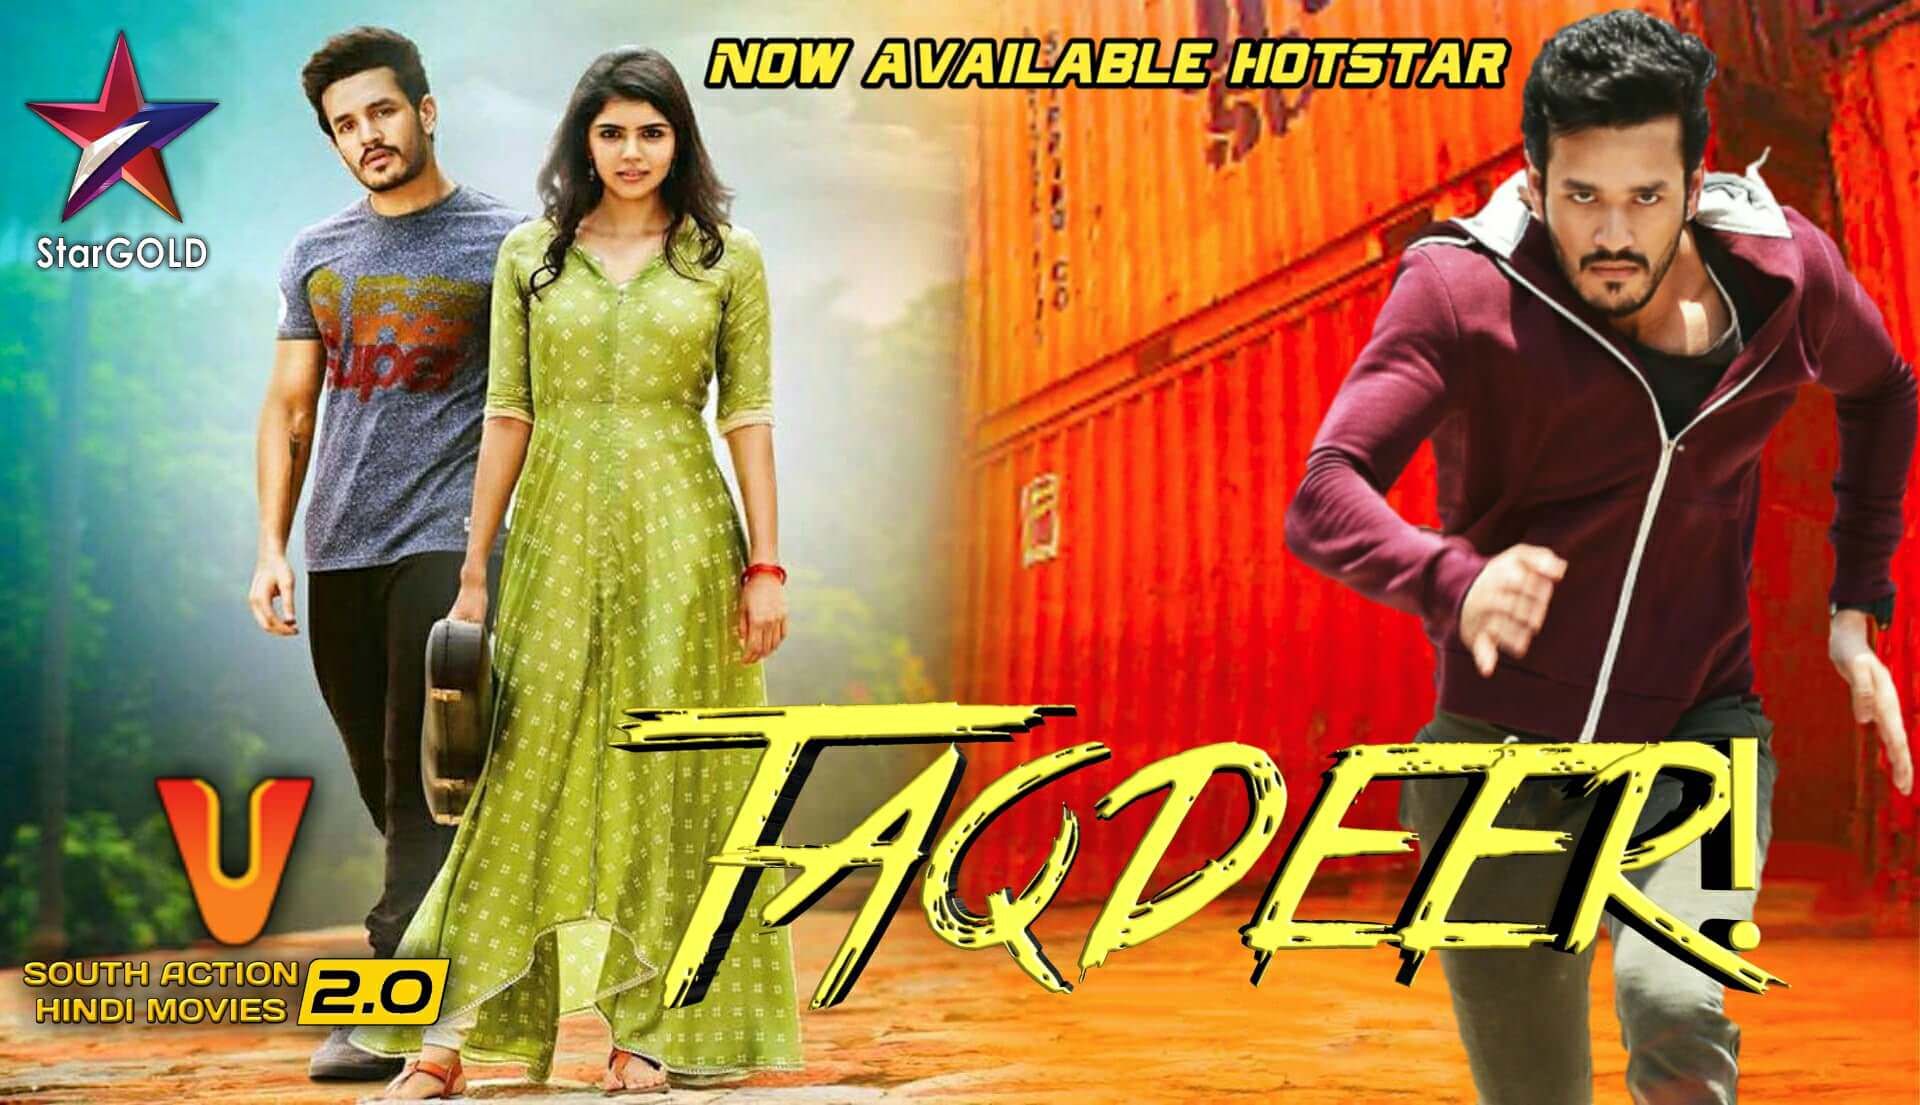 Download Tollywood Movies In Hd Quality